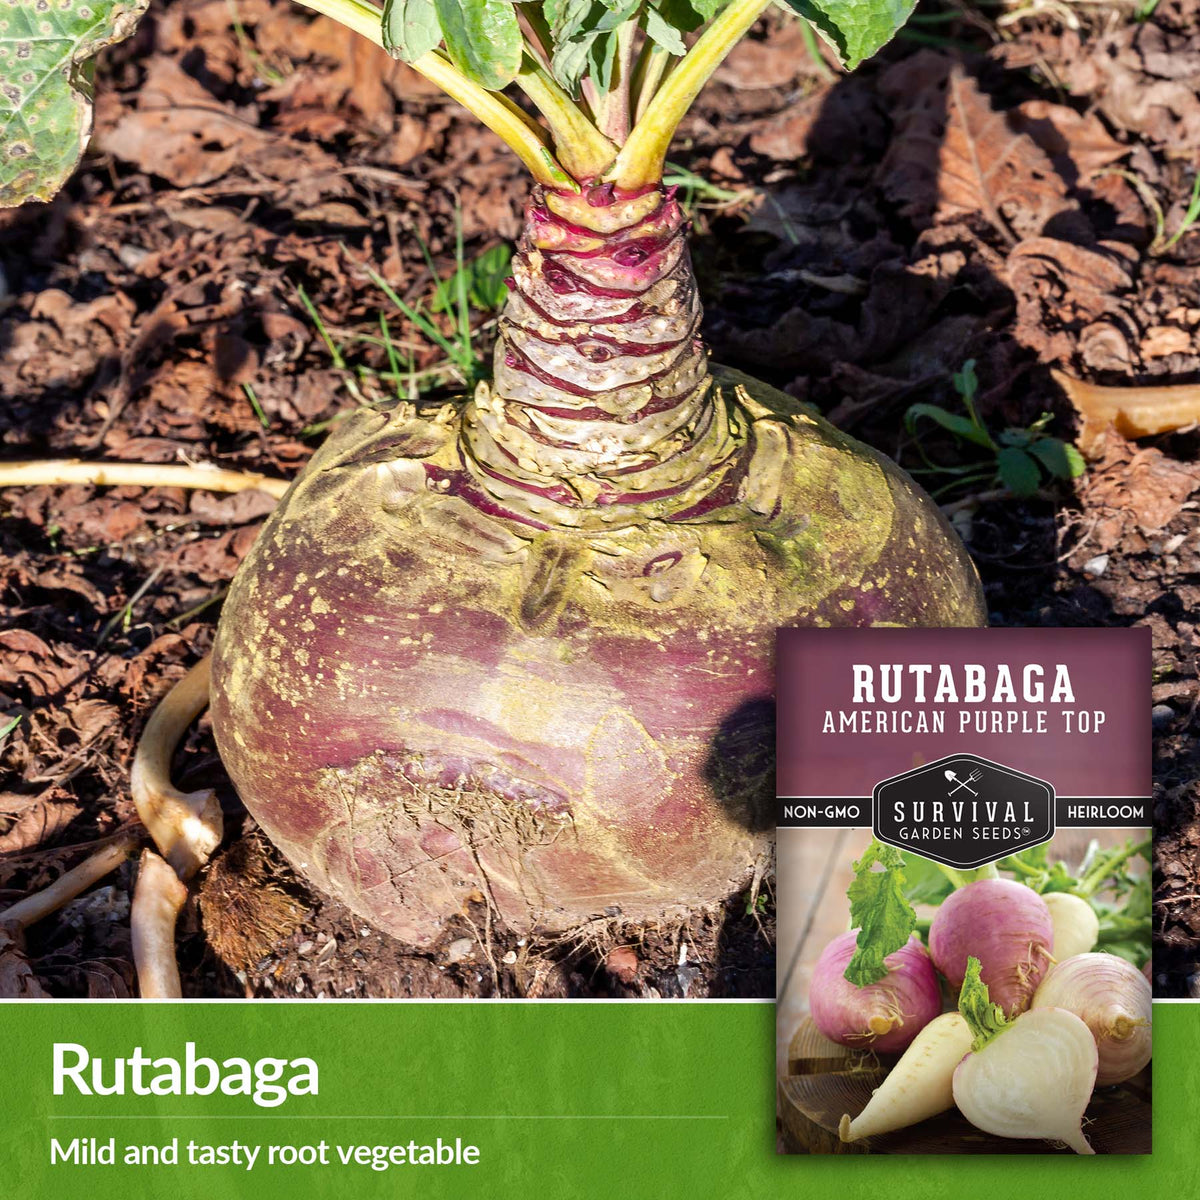 Rutabaga are a mild and tasty root vegetable